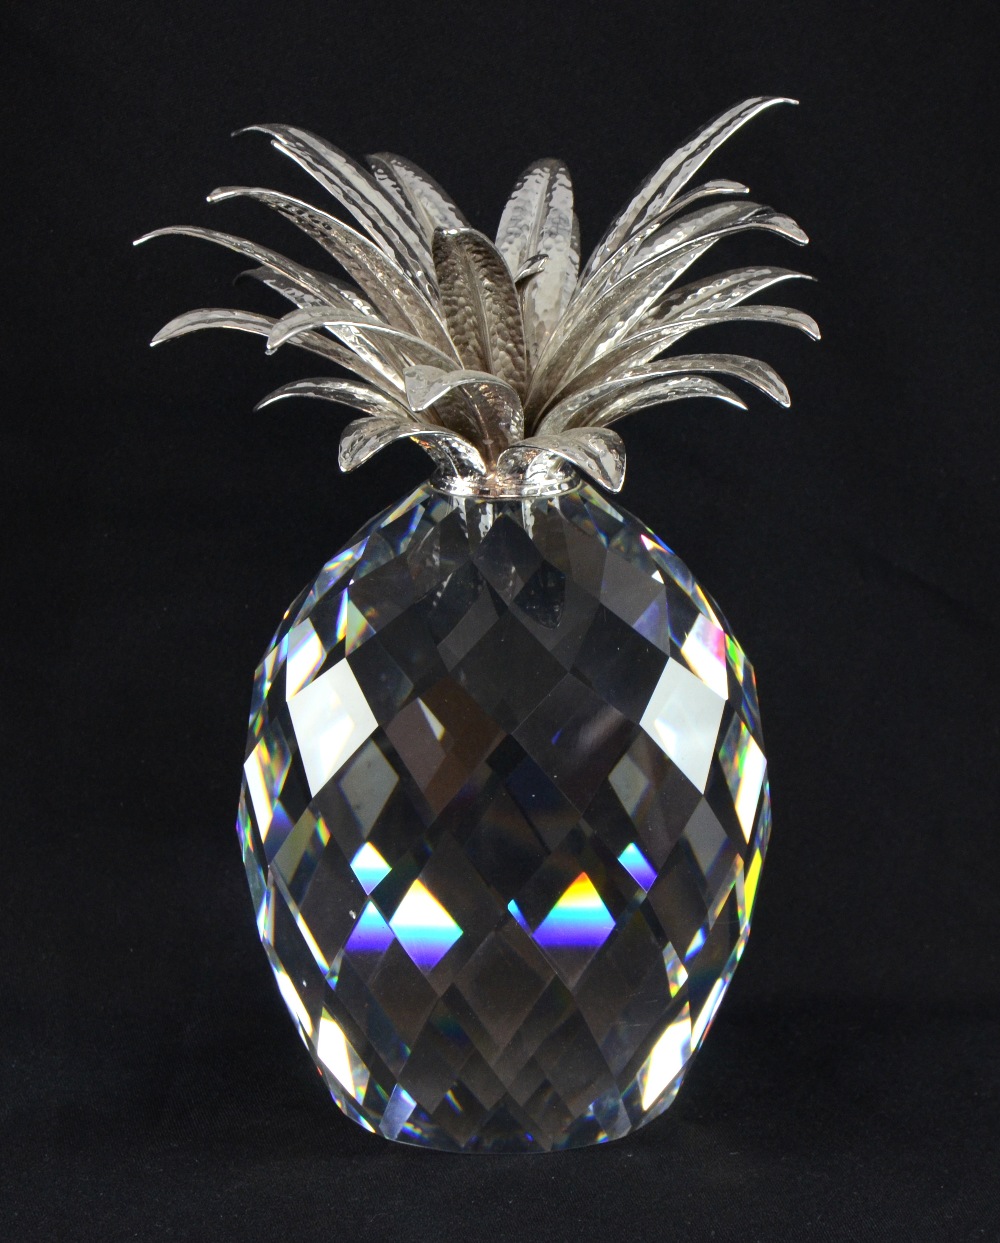 Swarovski crystal Rhodium Giant Pineapple , No. 010258.  designed by Max Schreck, Size: 260mm - Image 2 of 2